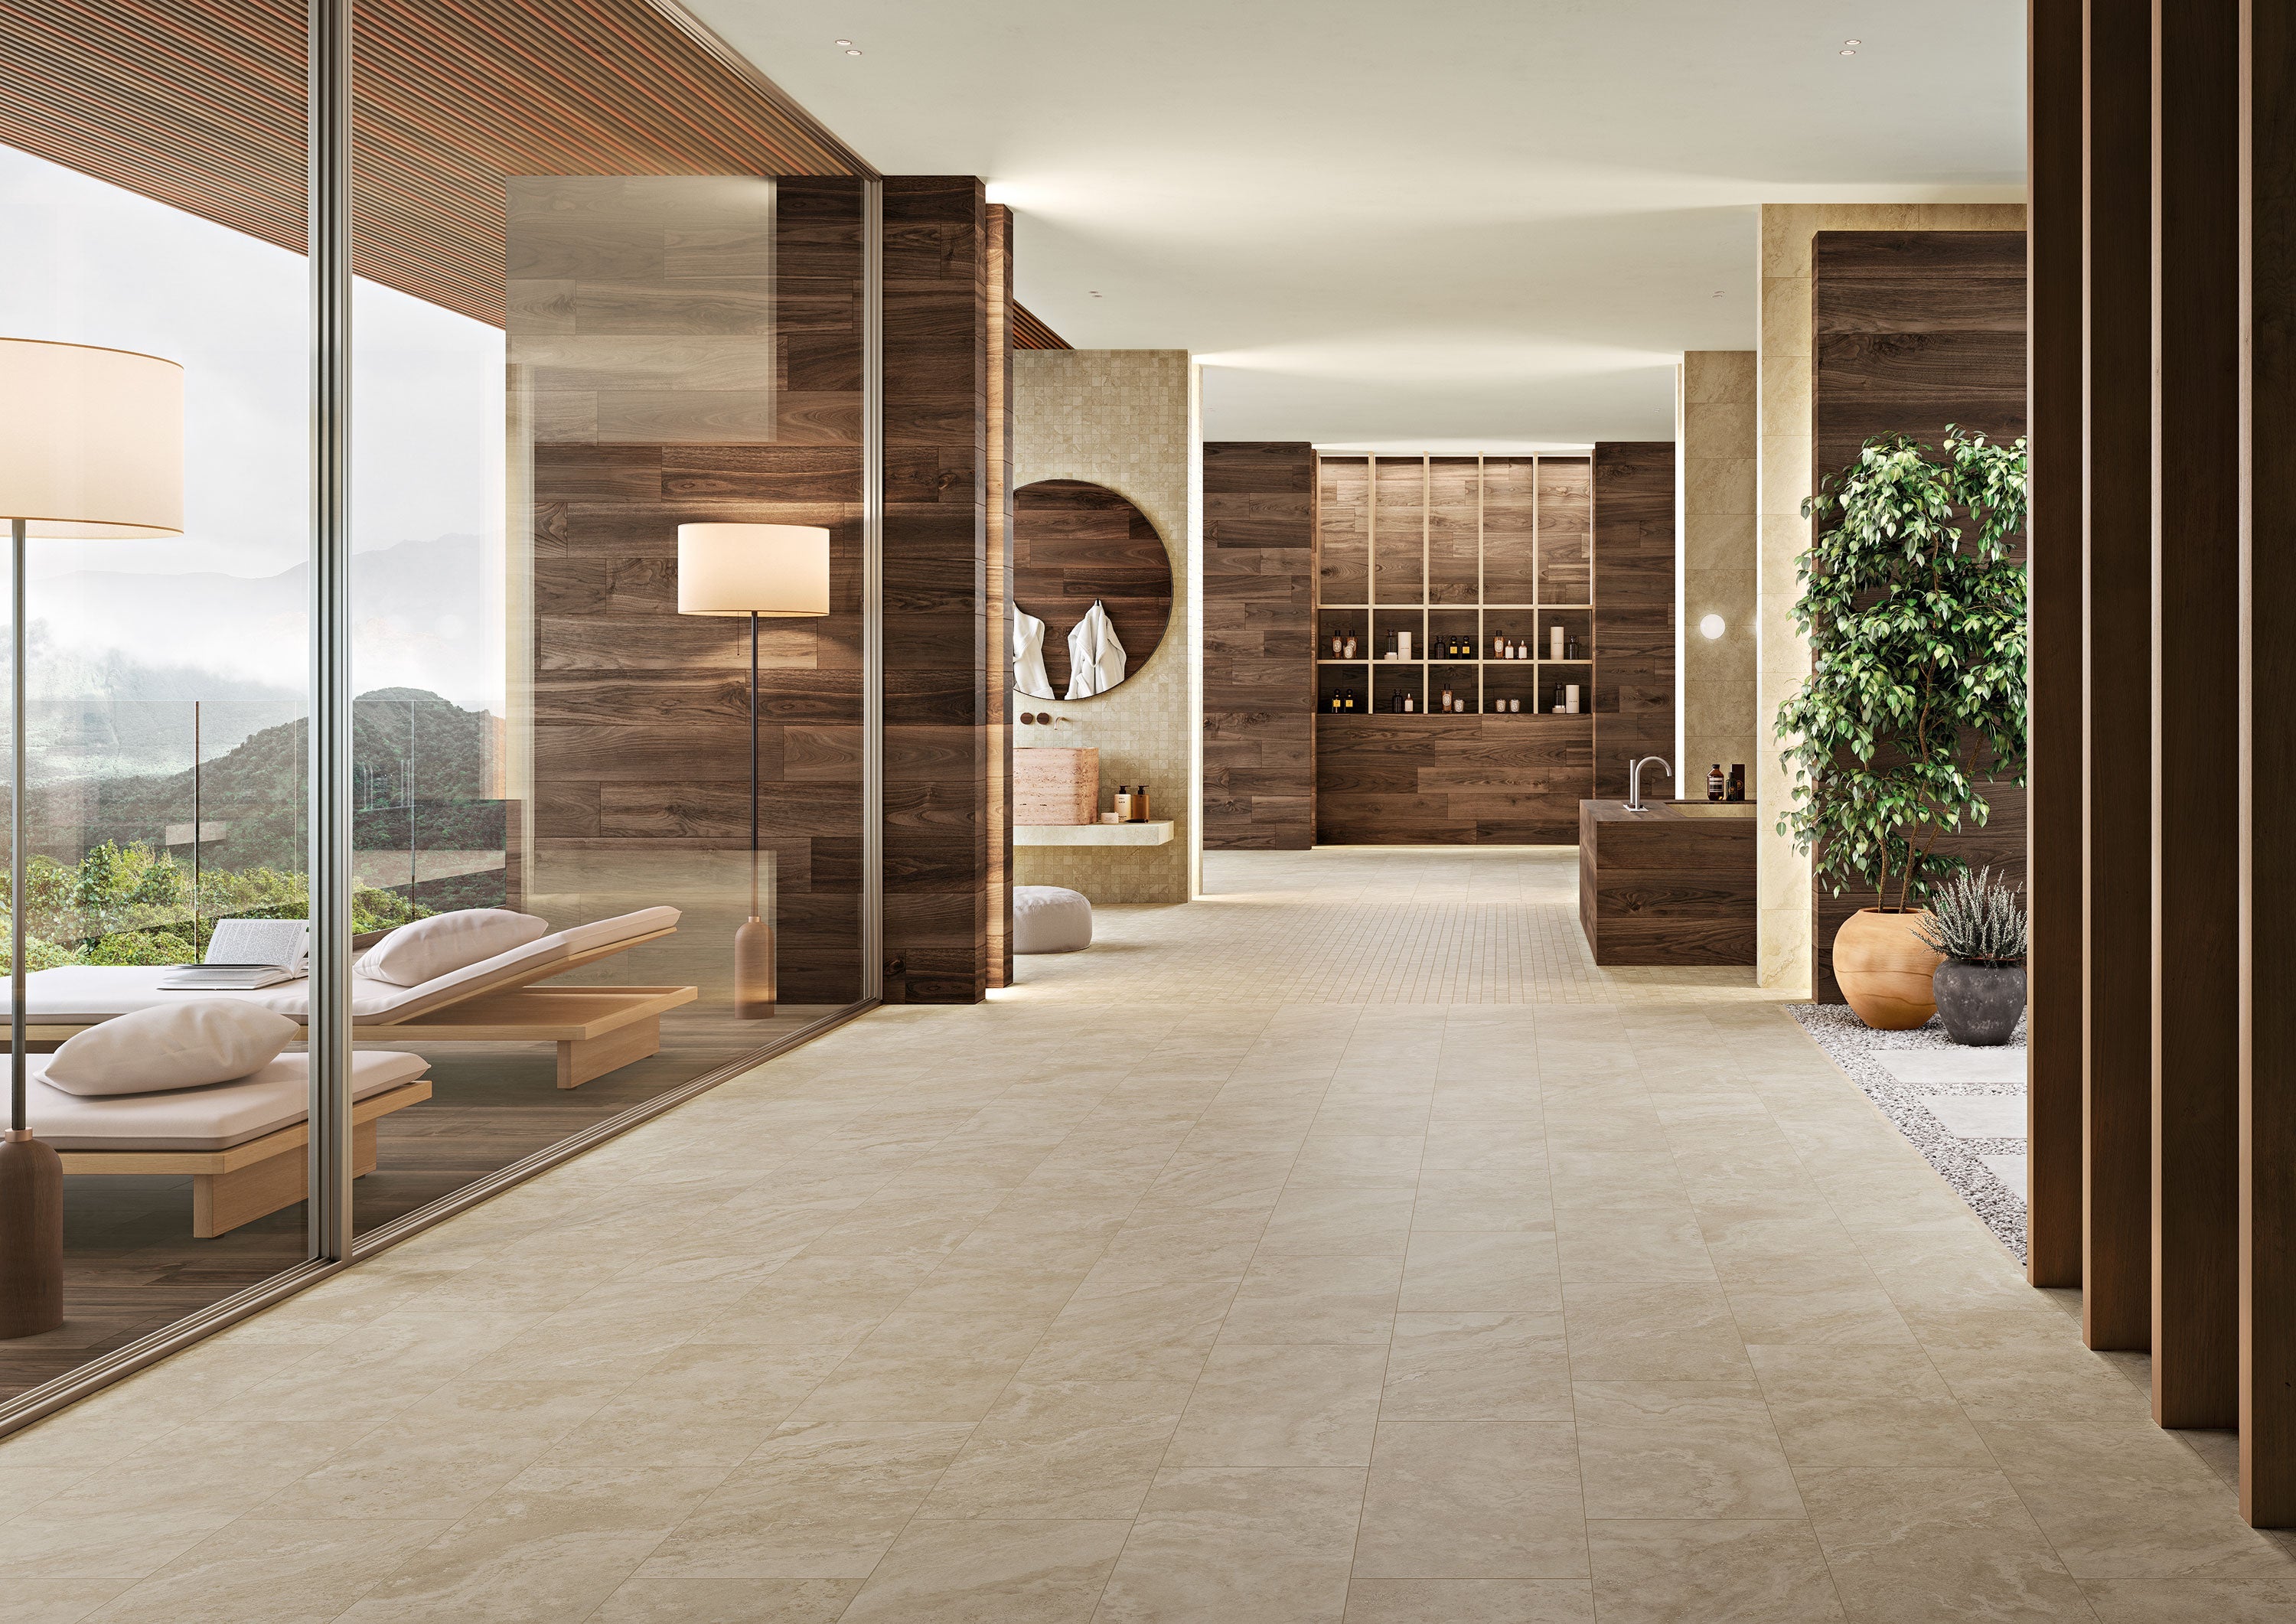 Luxurious porcelain tile collection from Surface Group showcasing a variety of textures and colors in a modern, well-lit bathroom setting with natural scenery visible through large windows.